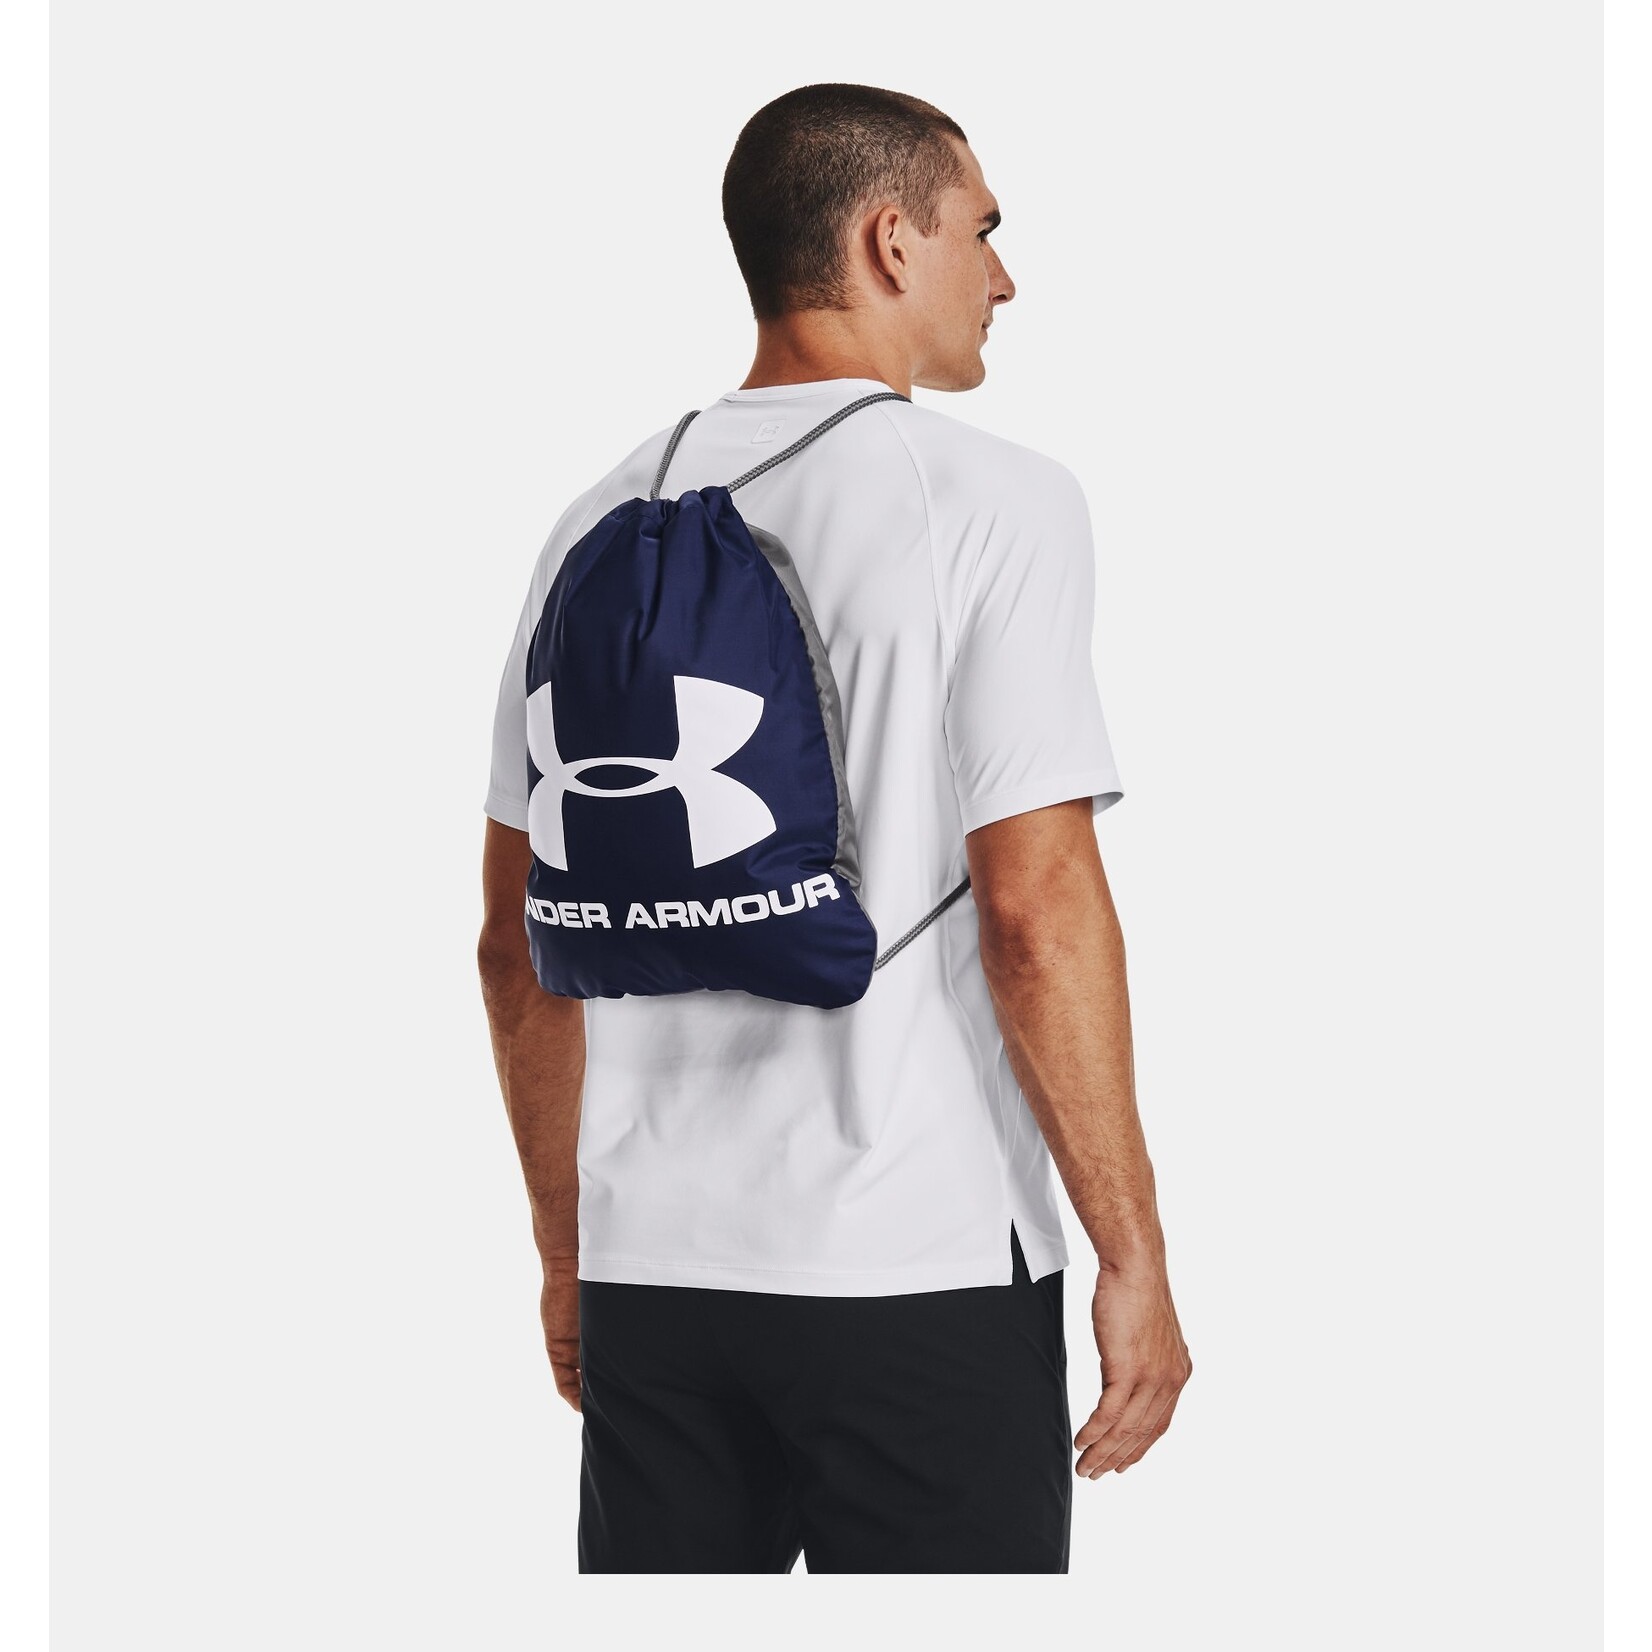 UNDER ARMOUR Ozee Sackpack - Midnight Navy/White